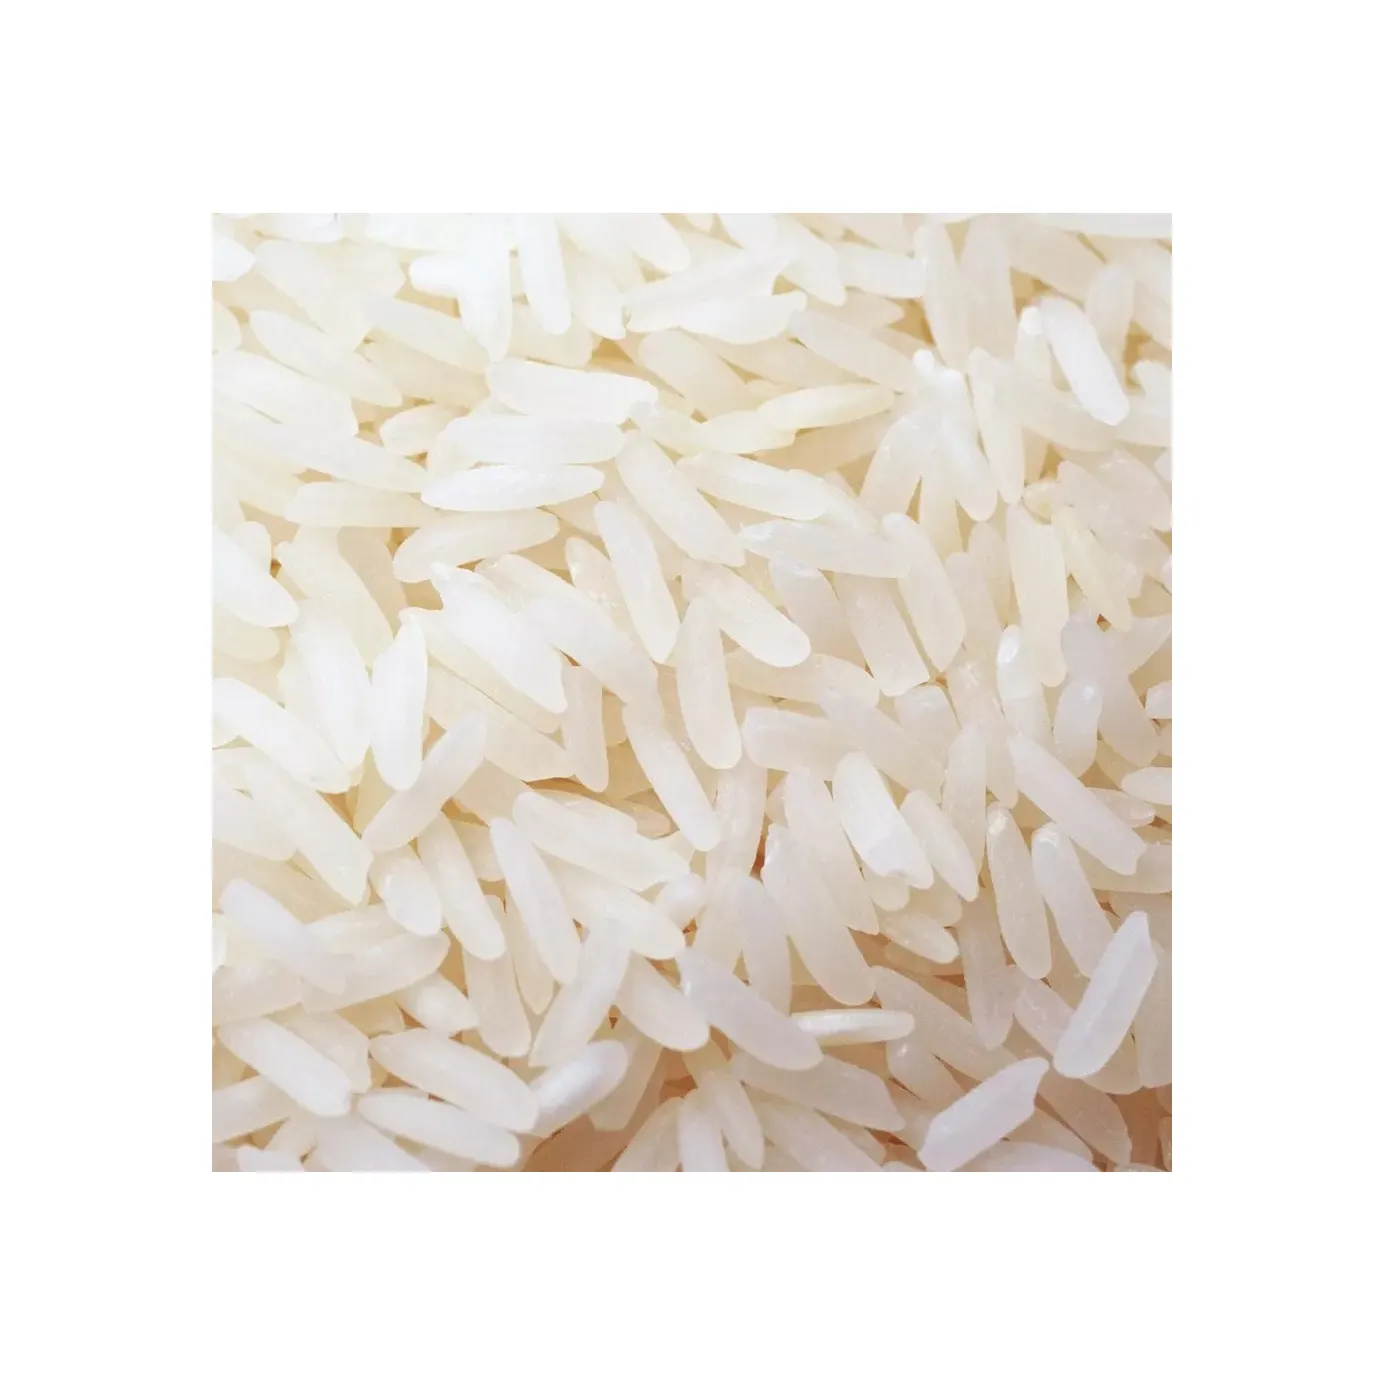 good quality 100% Purity Jasmine Rice/Long Grain Rice Parboiled with 5% Broken White Long-grain Rice 0 Admixture 24 Months Dry P